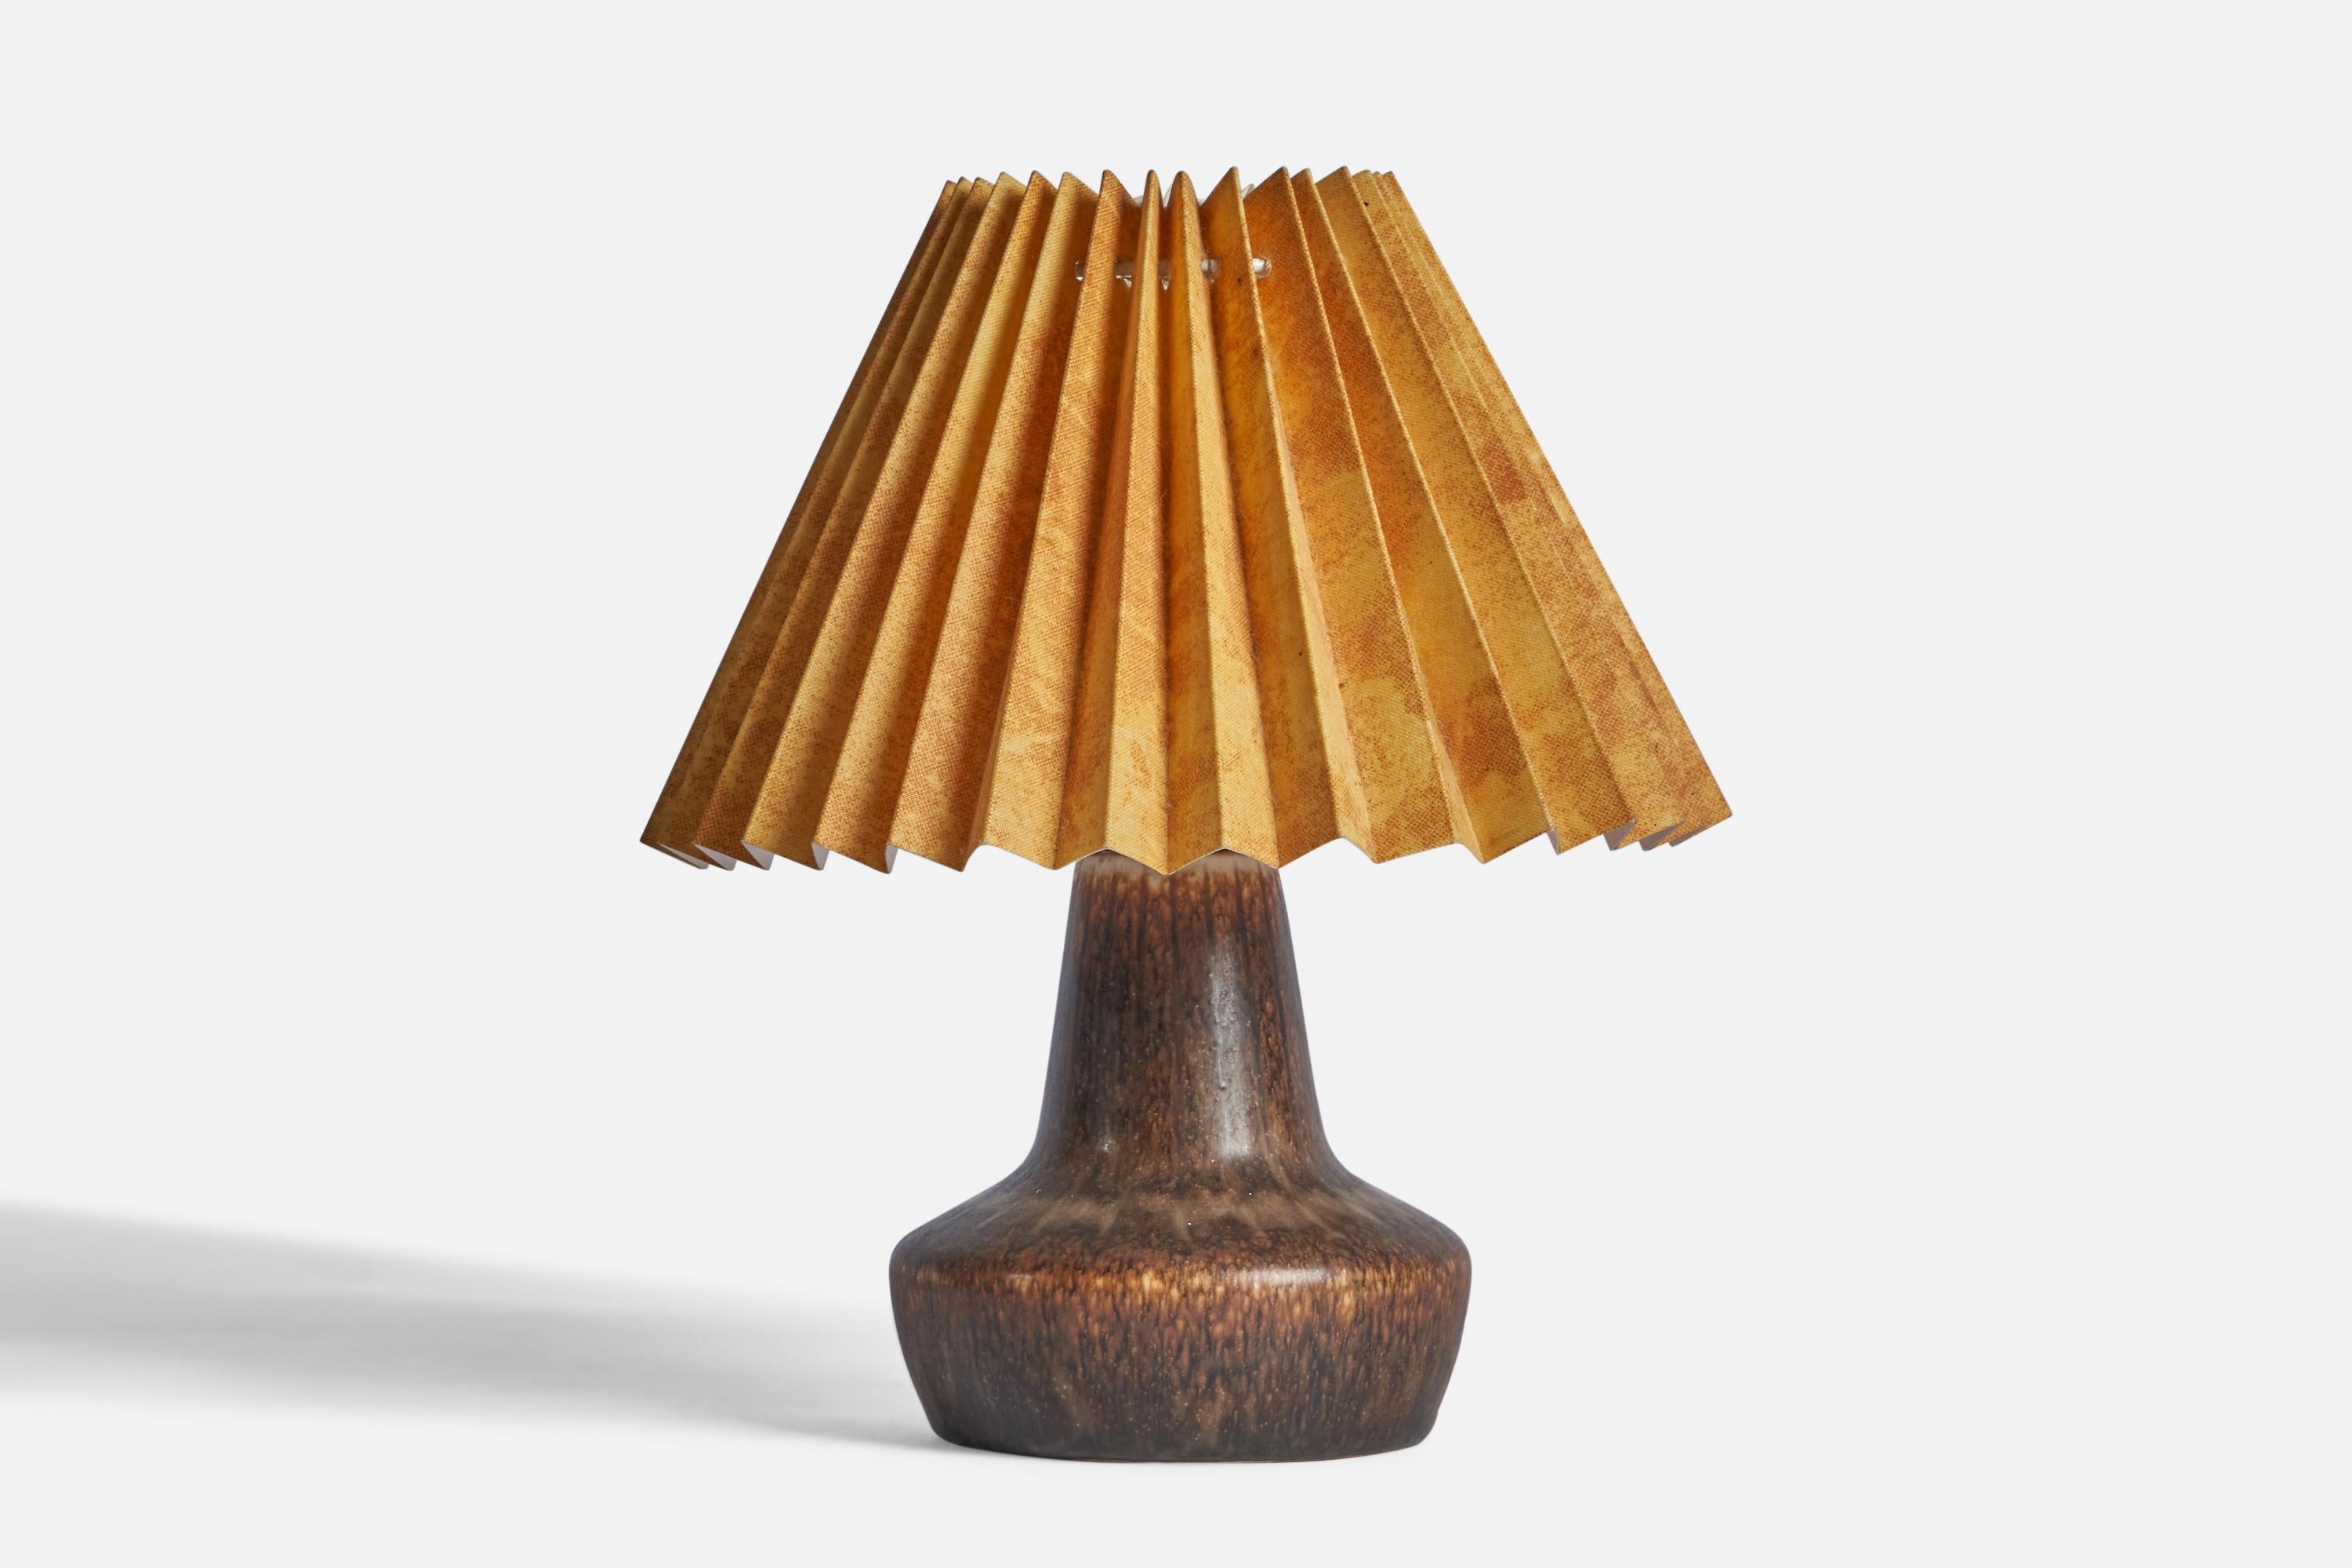 A brown-glazed stoneware and yellow paper table lamp, designed by Gunnar Nylund and produced by Rörstrand, Sweden, 1940s.

Overall Dimensions (inches): 9.5